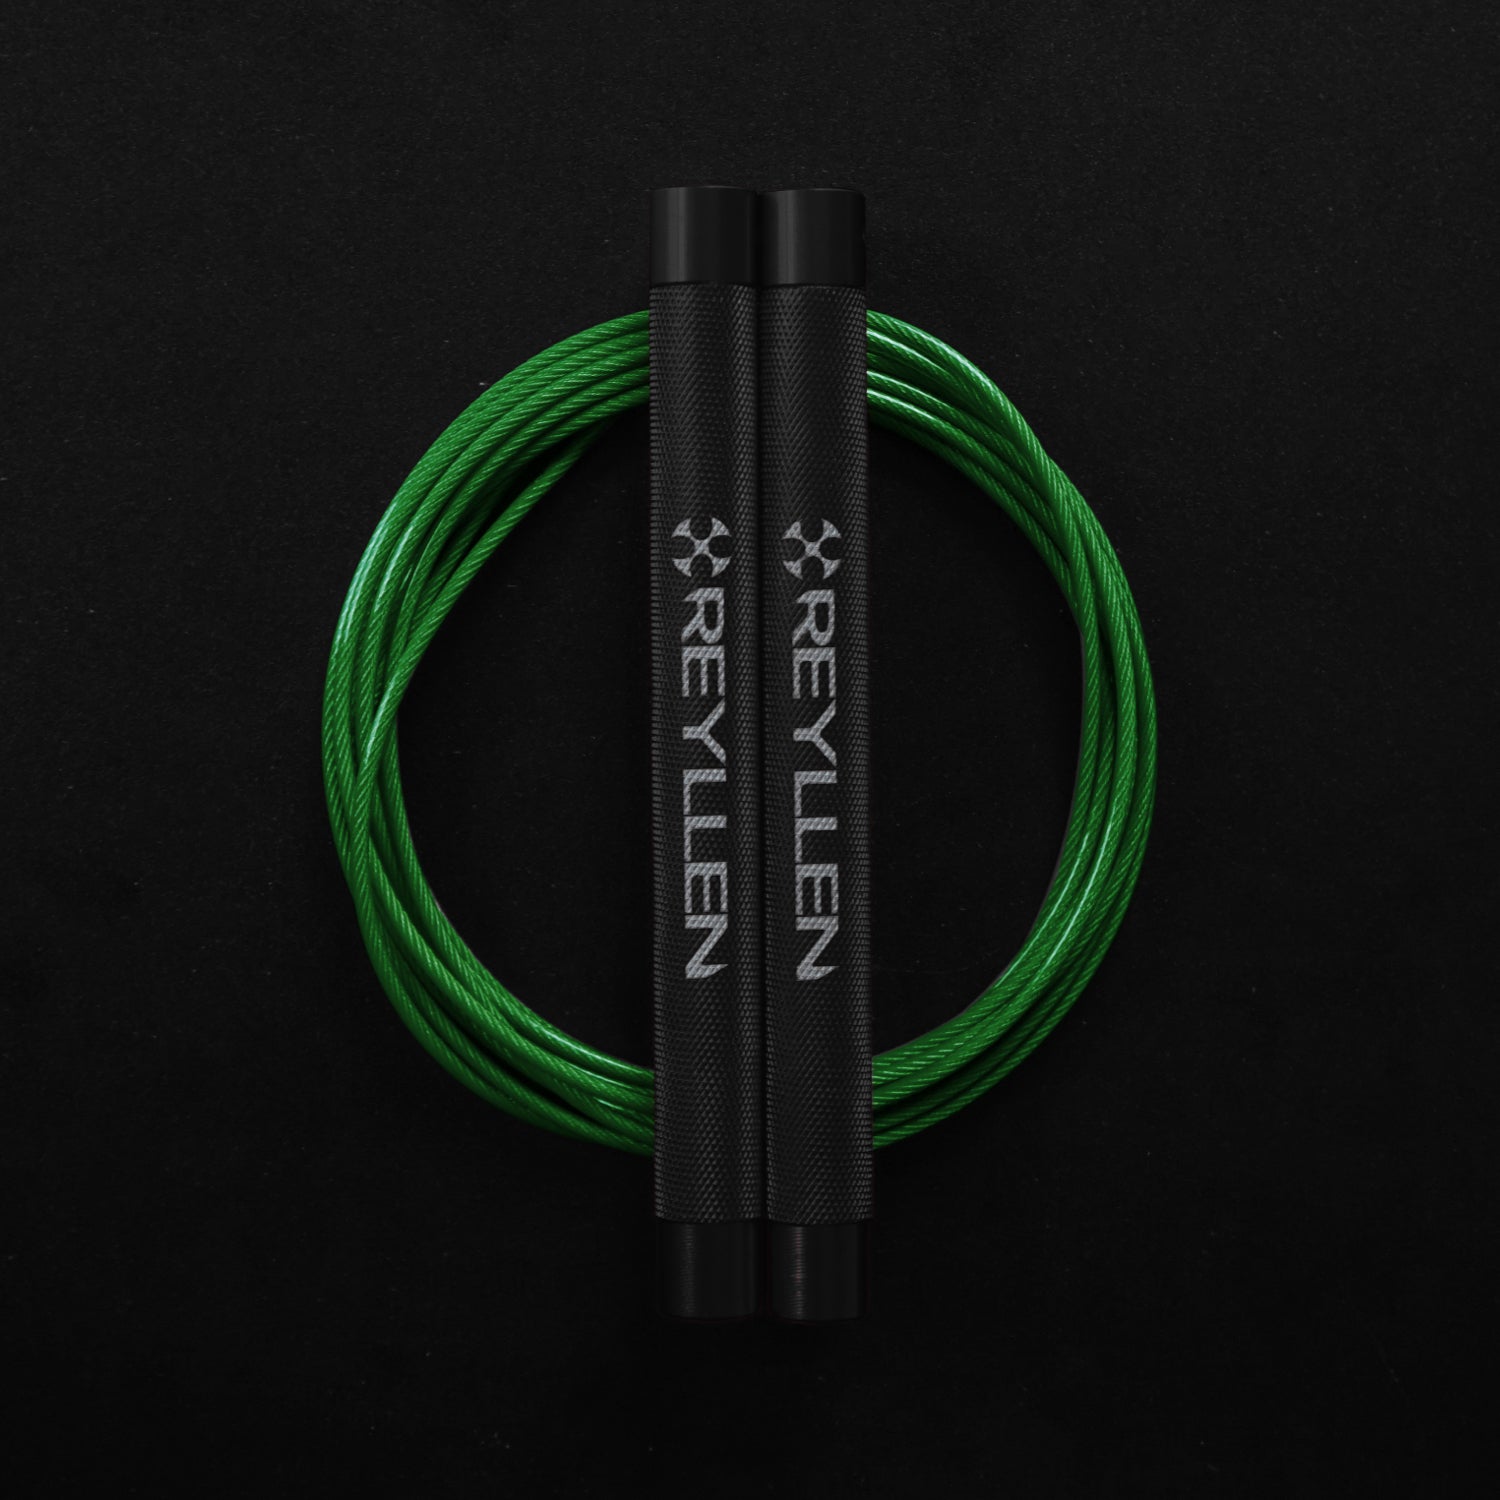 Reyllen Flare Mx Speed Skipping Jump Rope - Aluminium Handles - black with green pvc cable